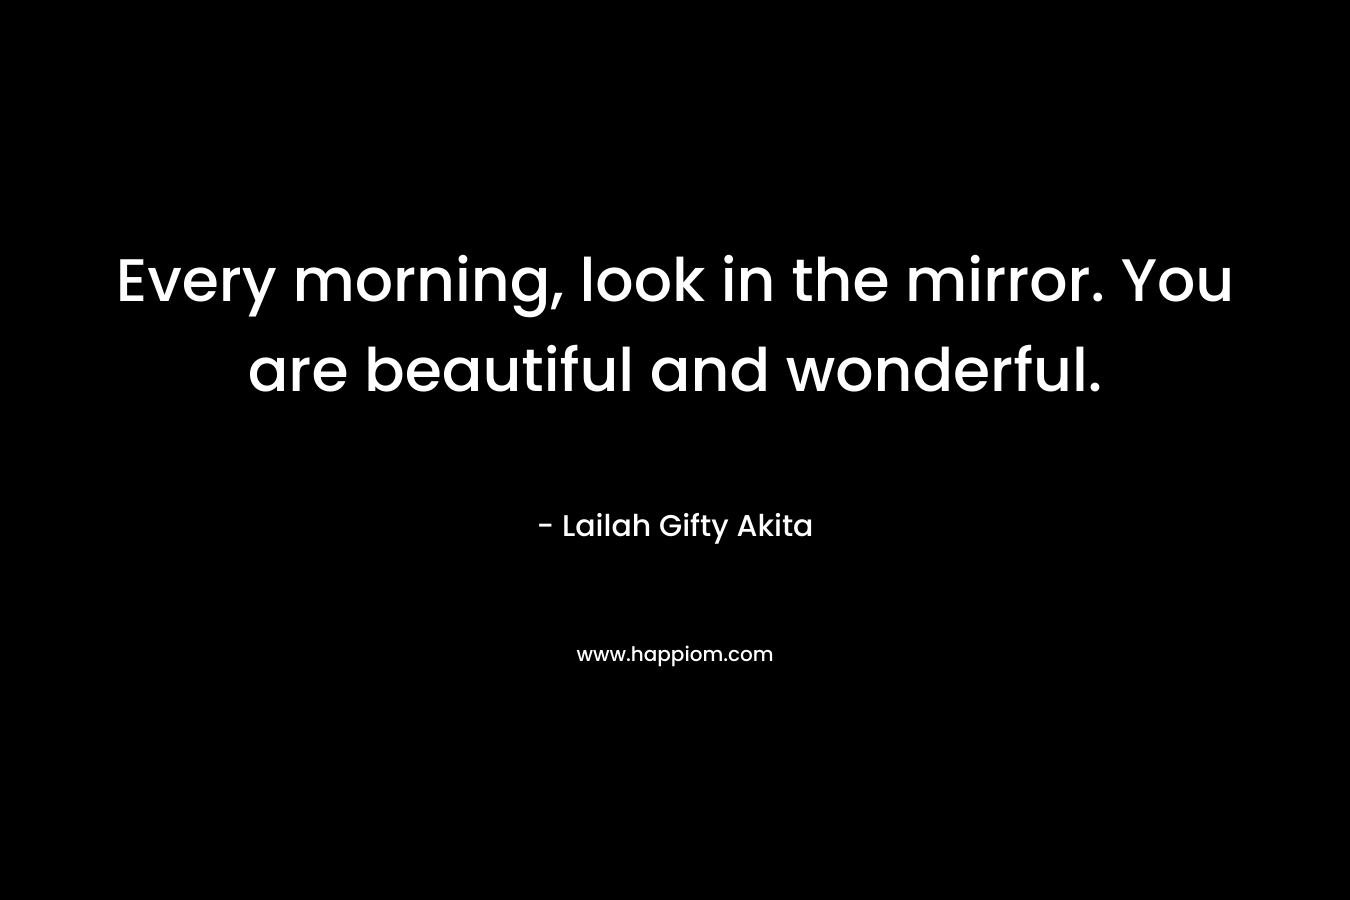 Every morning, look in the mirror. You are beautiful and wonderful.